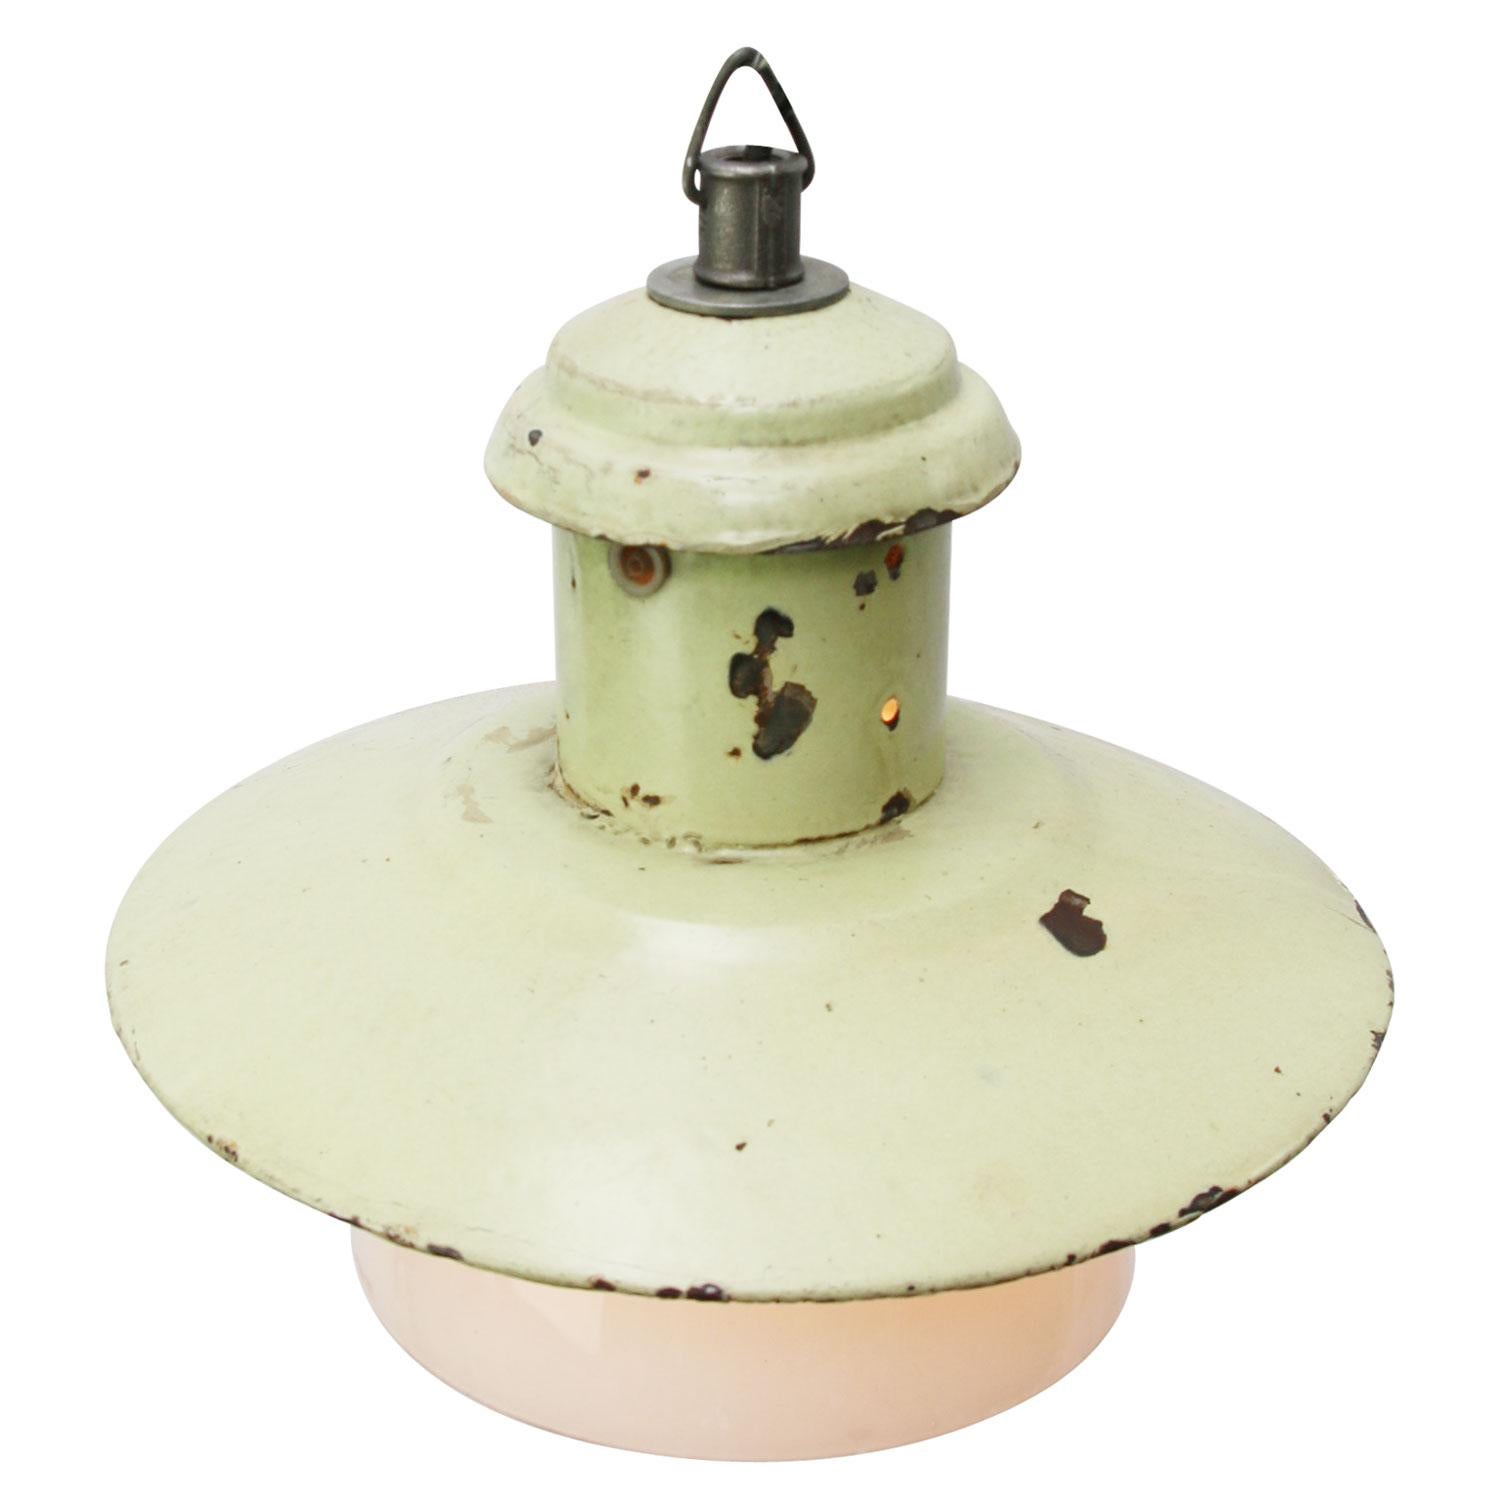 Light Green enamel factory pendant.
White inside. White opaline glass

Measure: Diameter glass 21 cm

Weight: 2.20 kg / 4.9 lb

Priced per individual item. All lamps have been made suitable by international standards for incandescent light